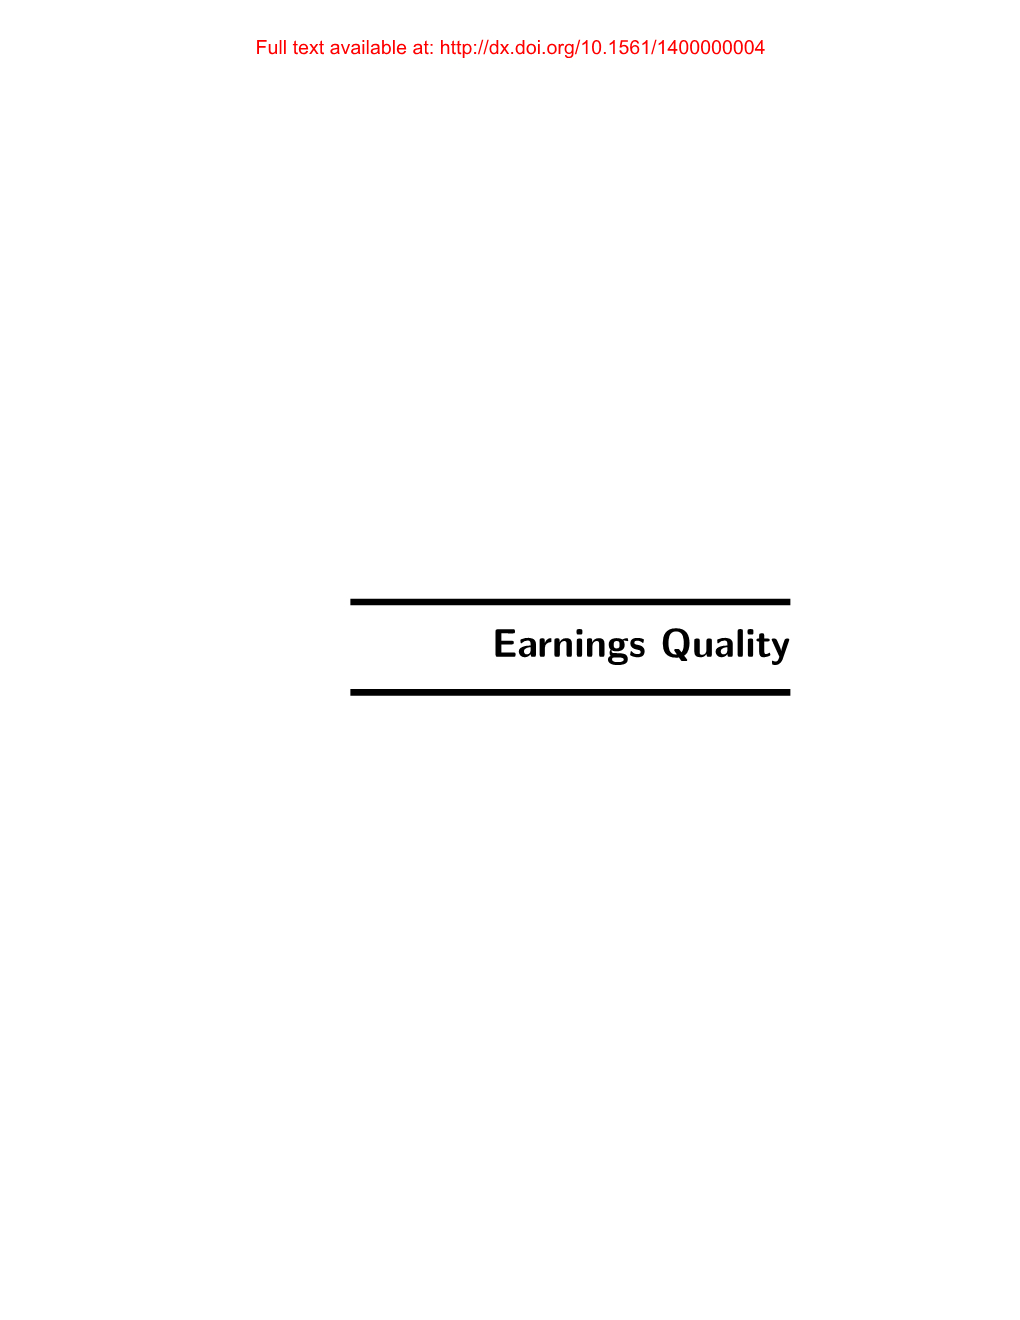 Earnings Quality Full Text Available At